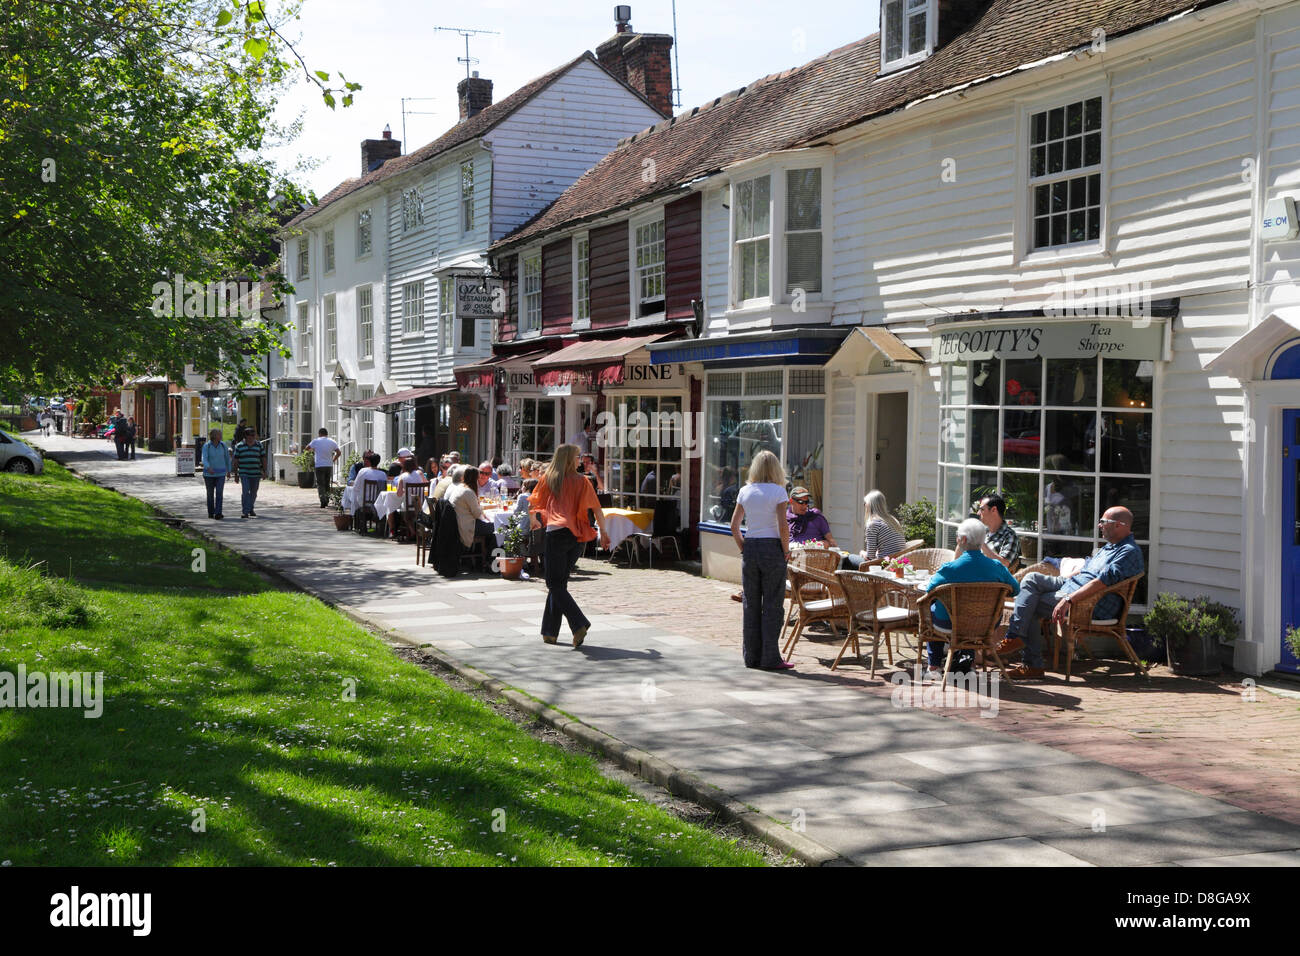 Pavement restaurants and cafes in Tenterden Kent UK GB Stock Photo